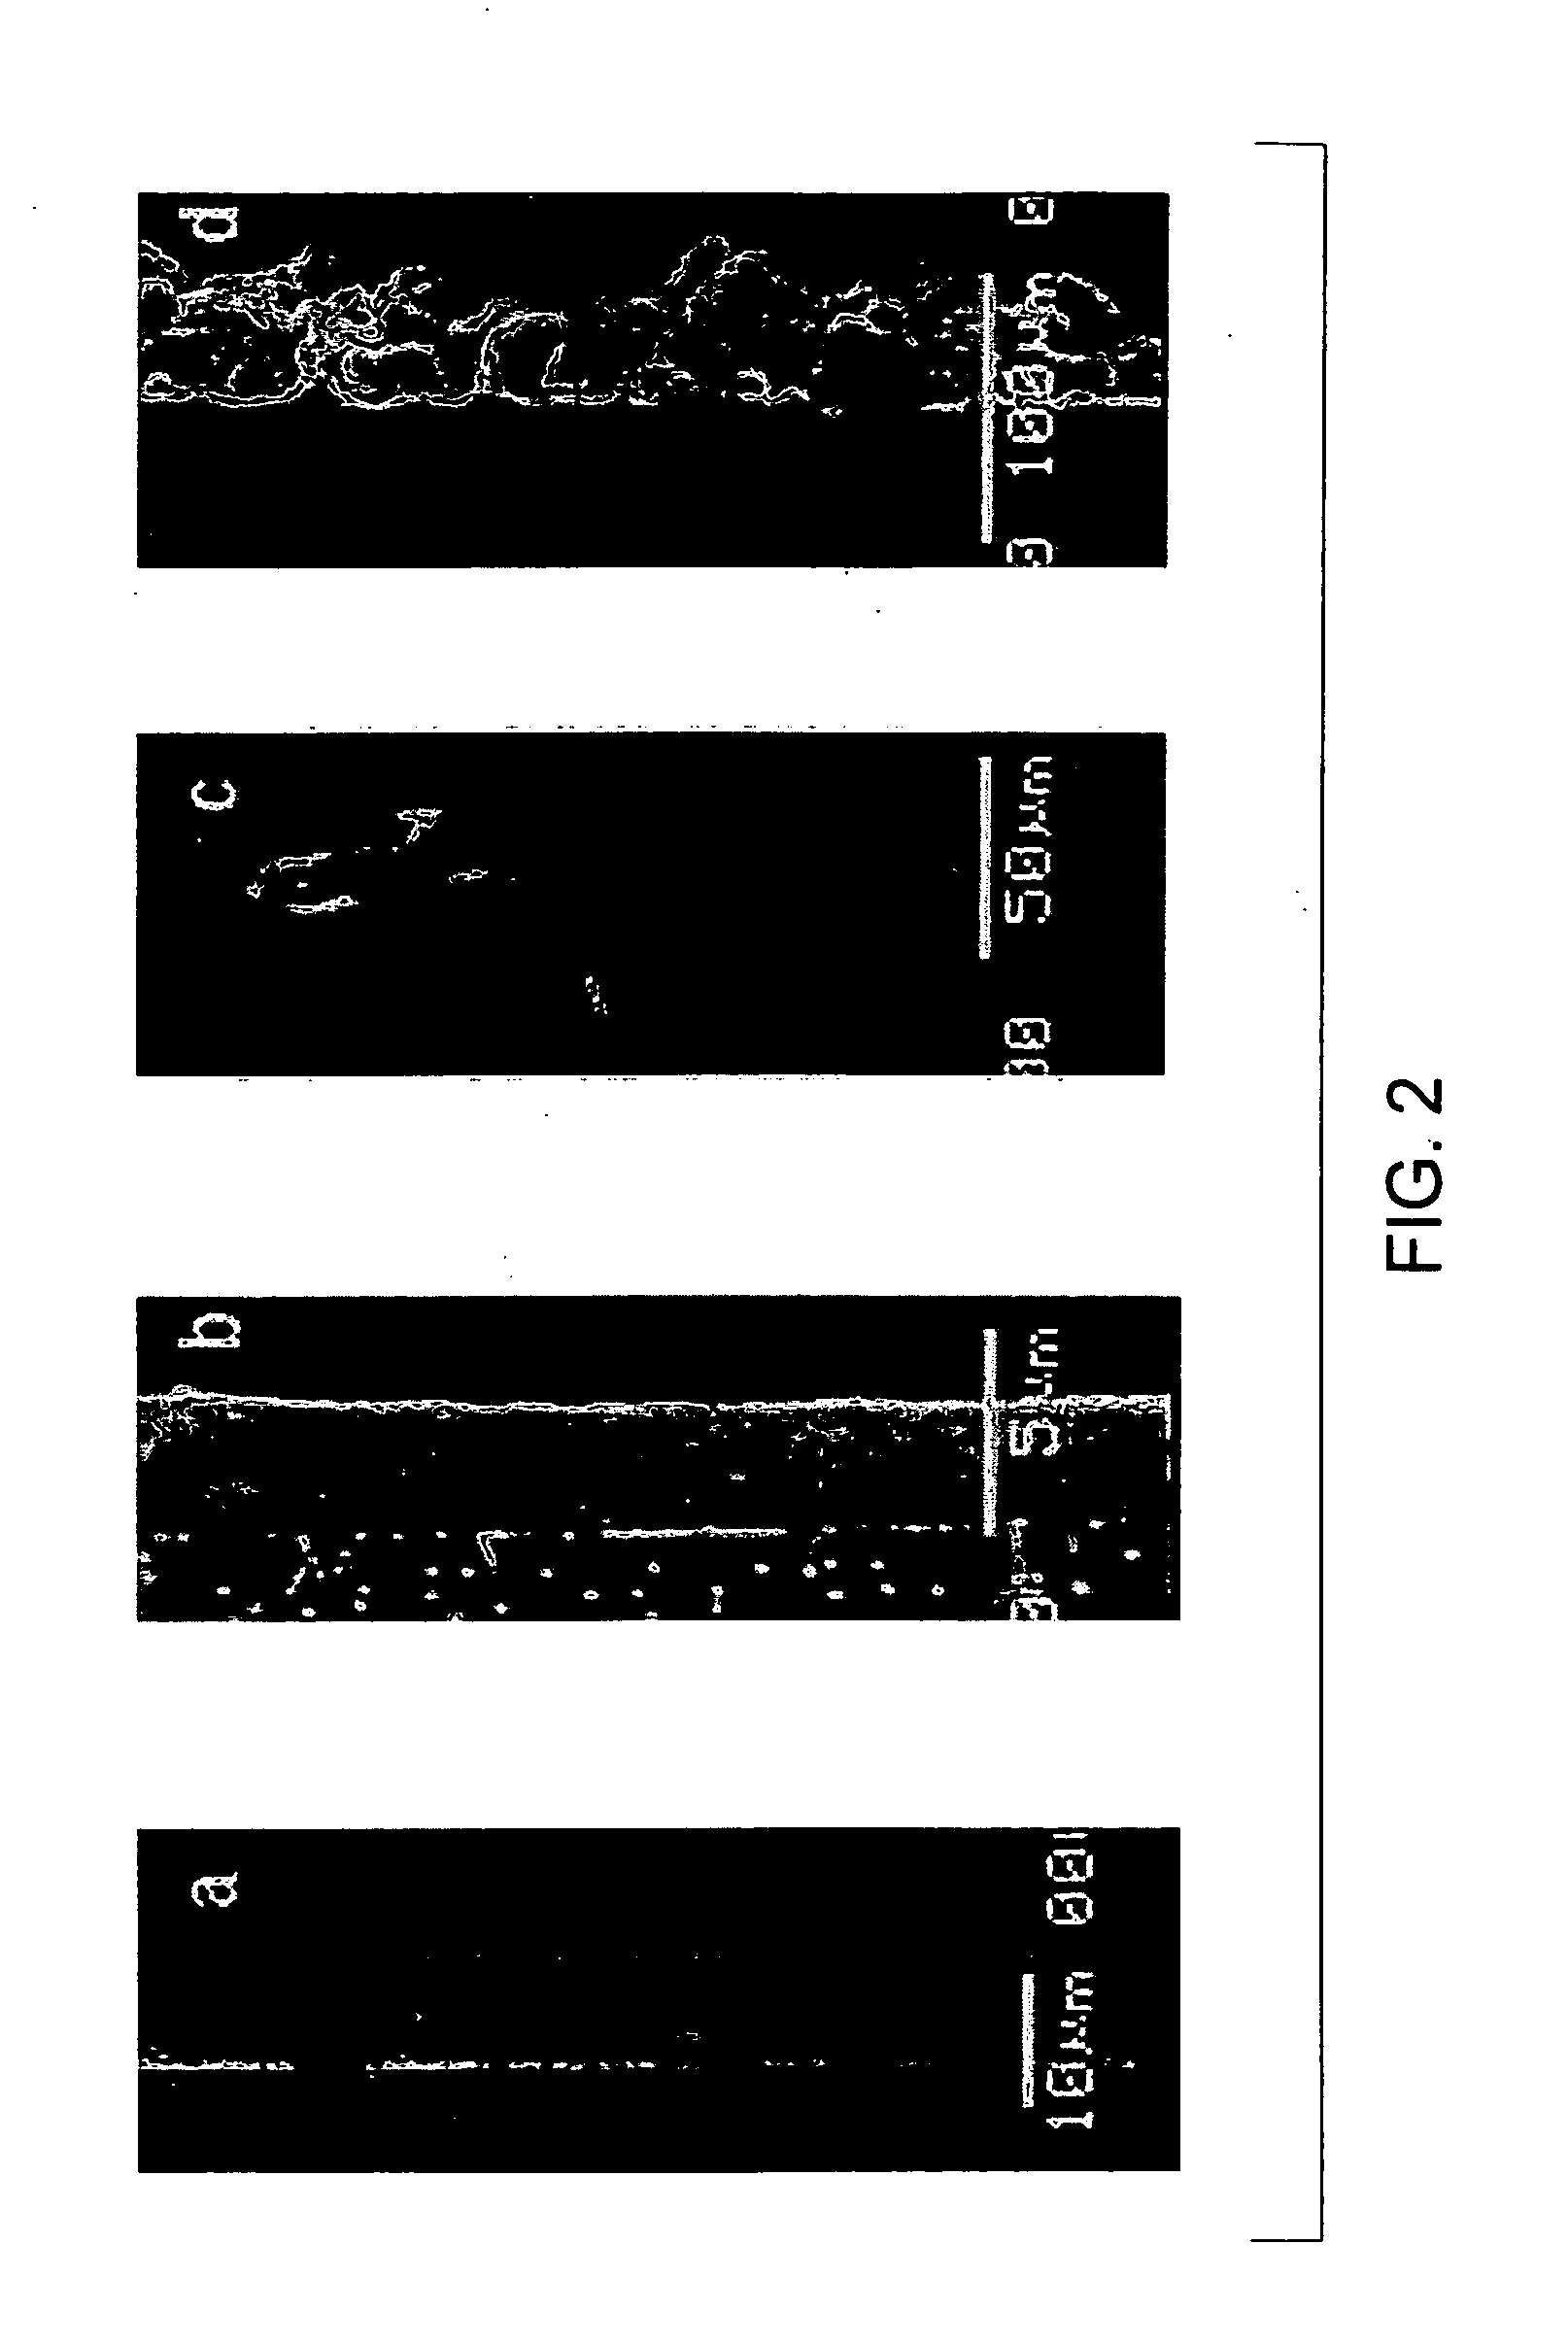 Superhydrophobic coating composition and coated articles obtained therefrom